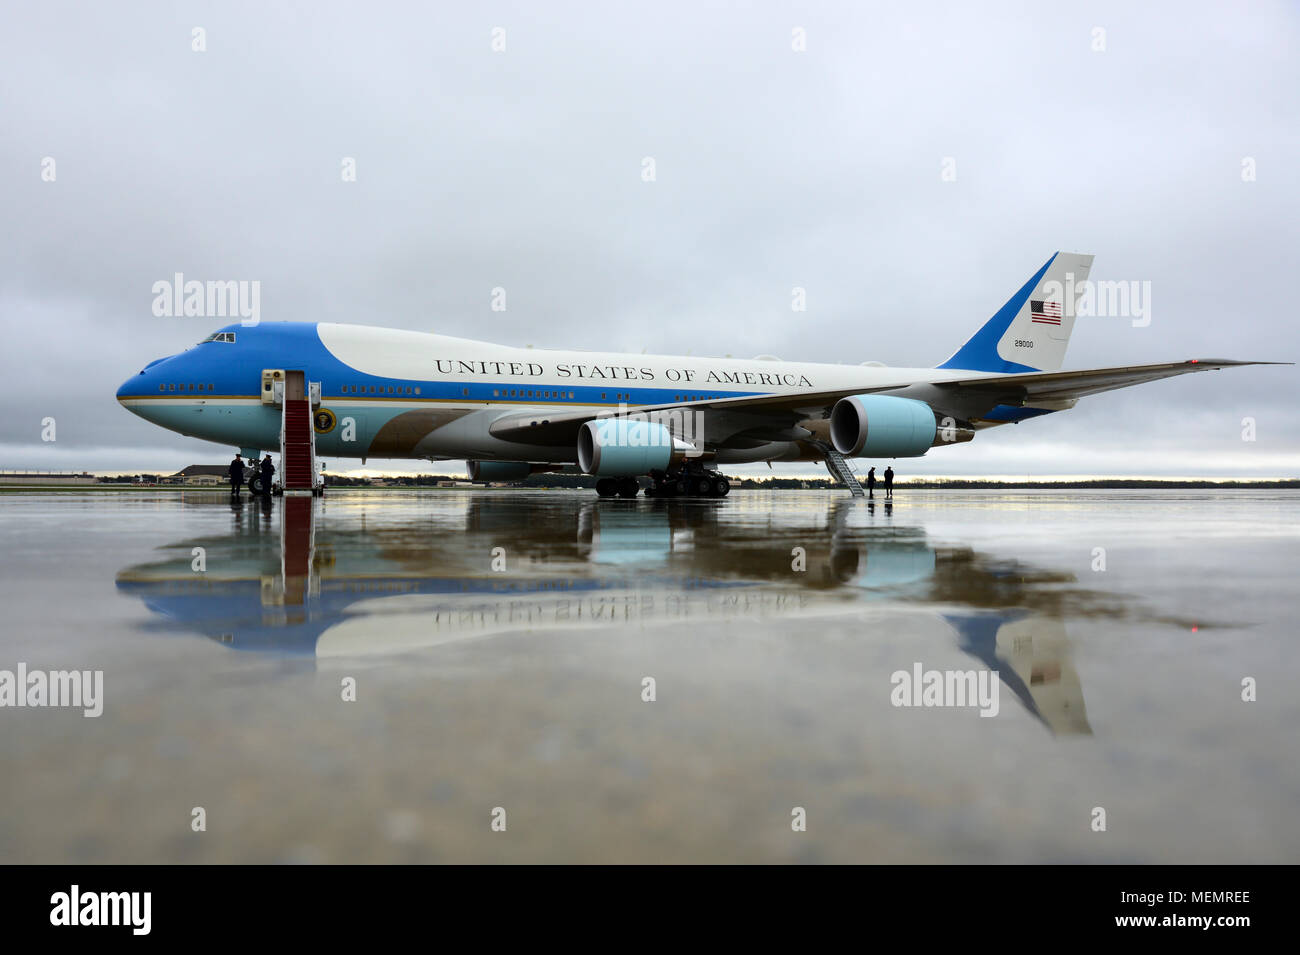 Air Force One is prepped for departure just outside of the 89th Airlift Wing Passenger Terminal on Joint Base Andrews, Md., April 16, 2018. President of the United States Donald J. Trump departed JBA on board Air Force One in route to West Palm Beach, Fla. The 89th AW provides global Special Air Mission airlift, logistics, aerial port and communications for the president, vice president, cabinet members, combatant commanders and other senior military and elected leaders as tasked by the White House, Air Force chief of staff and Air Mobility Command. (U.S. Air Force Photo/Staff Sgt. Kenny Holst Stock Photo